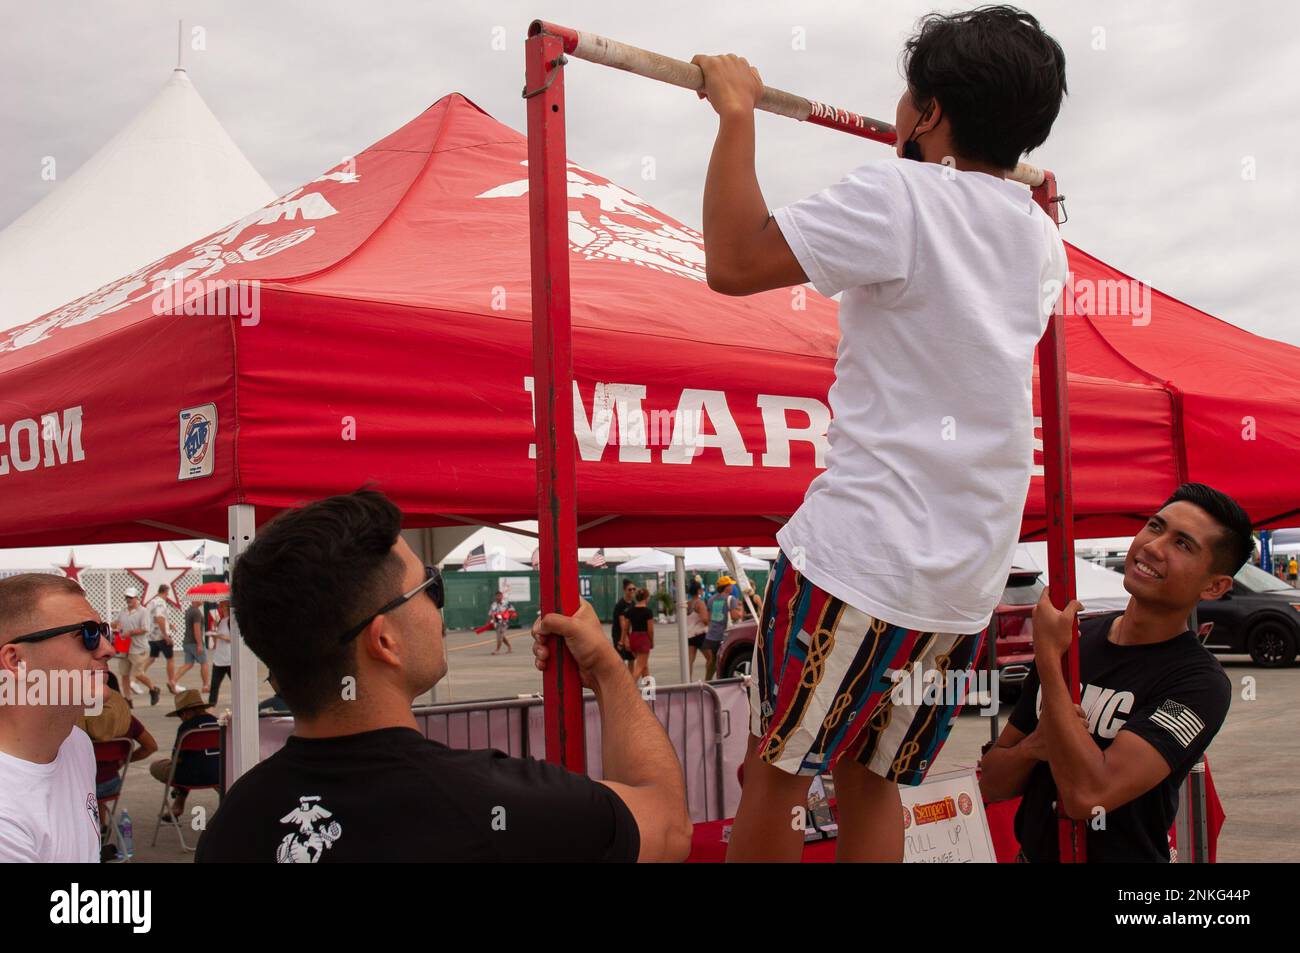 An airshow attendee attempts pull-ups at a Marine Corps recruiting vendor station during the 2022 Kaneohe Bay Air Show, Marine Corps Air Station Kaneohe Bay, Marine Corps Base Hawaii, Aug. 14, 2022. The air show provided an opportunity for MCBH to foster positive relationships with the local community, while providing a unique experience to the public. The Kaneohe Bay Air Show, which contained aerial performances, static displays, demonstrations and vendors, was designed to celebrate MCBH’s longstanding relationship with the local community. Stock Photo